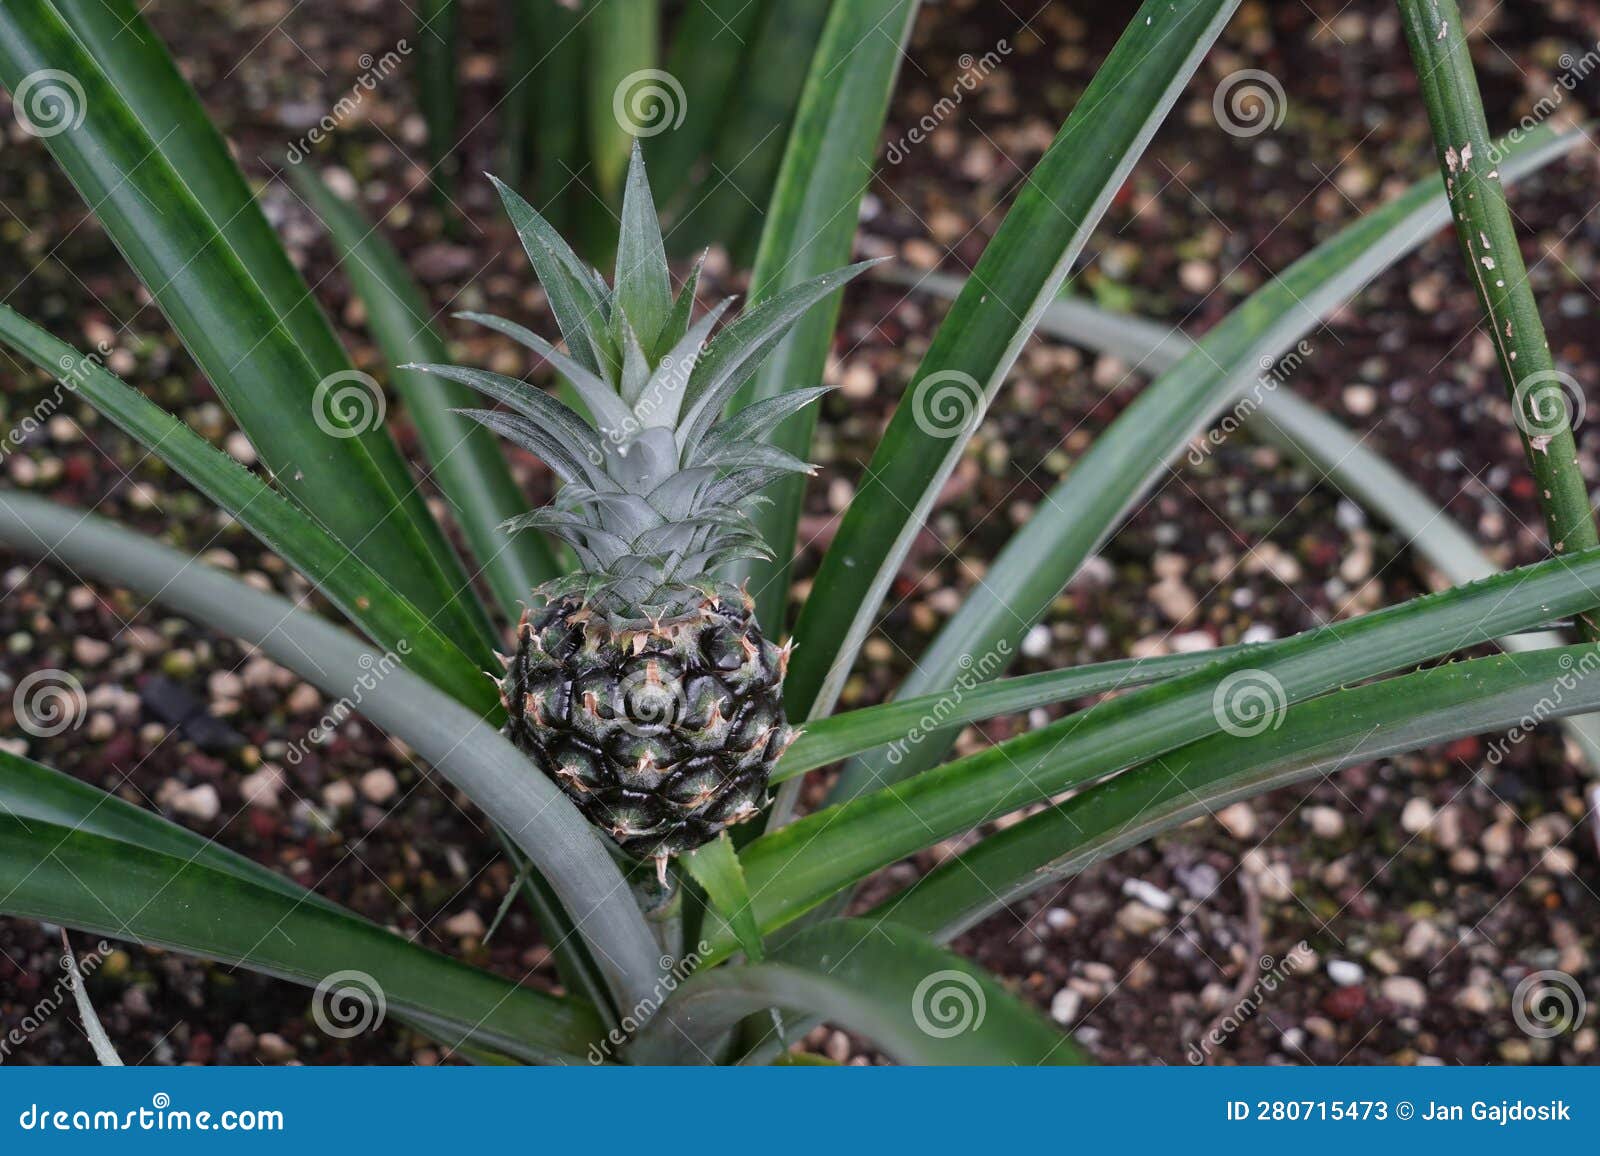 pineapple fruit, in latin called ananas comosus l. marr, growing naturally out of rosette of leaves.